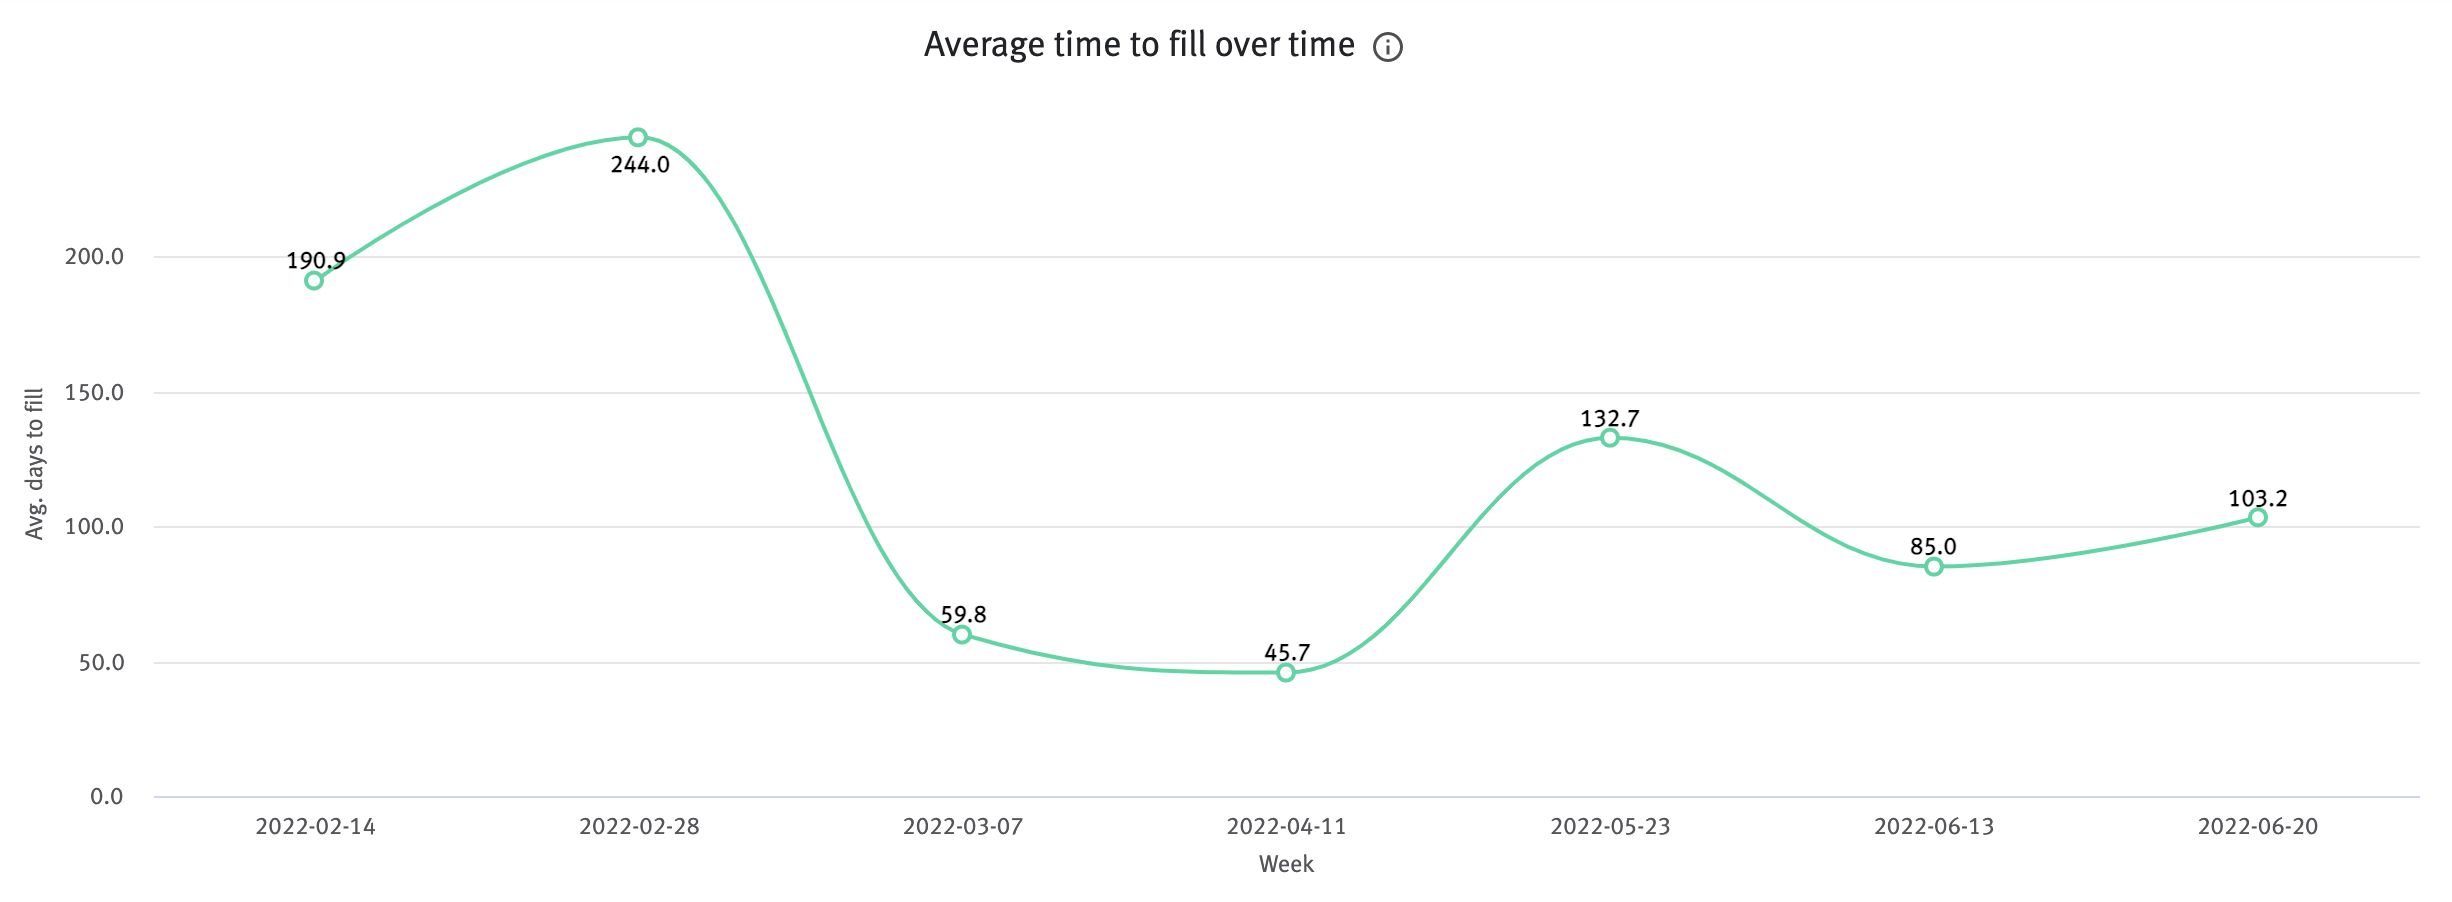 Average time to fill over time chart